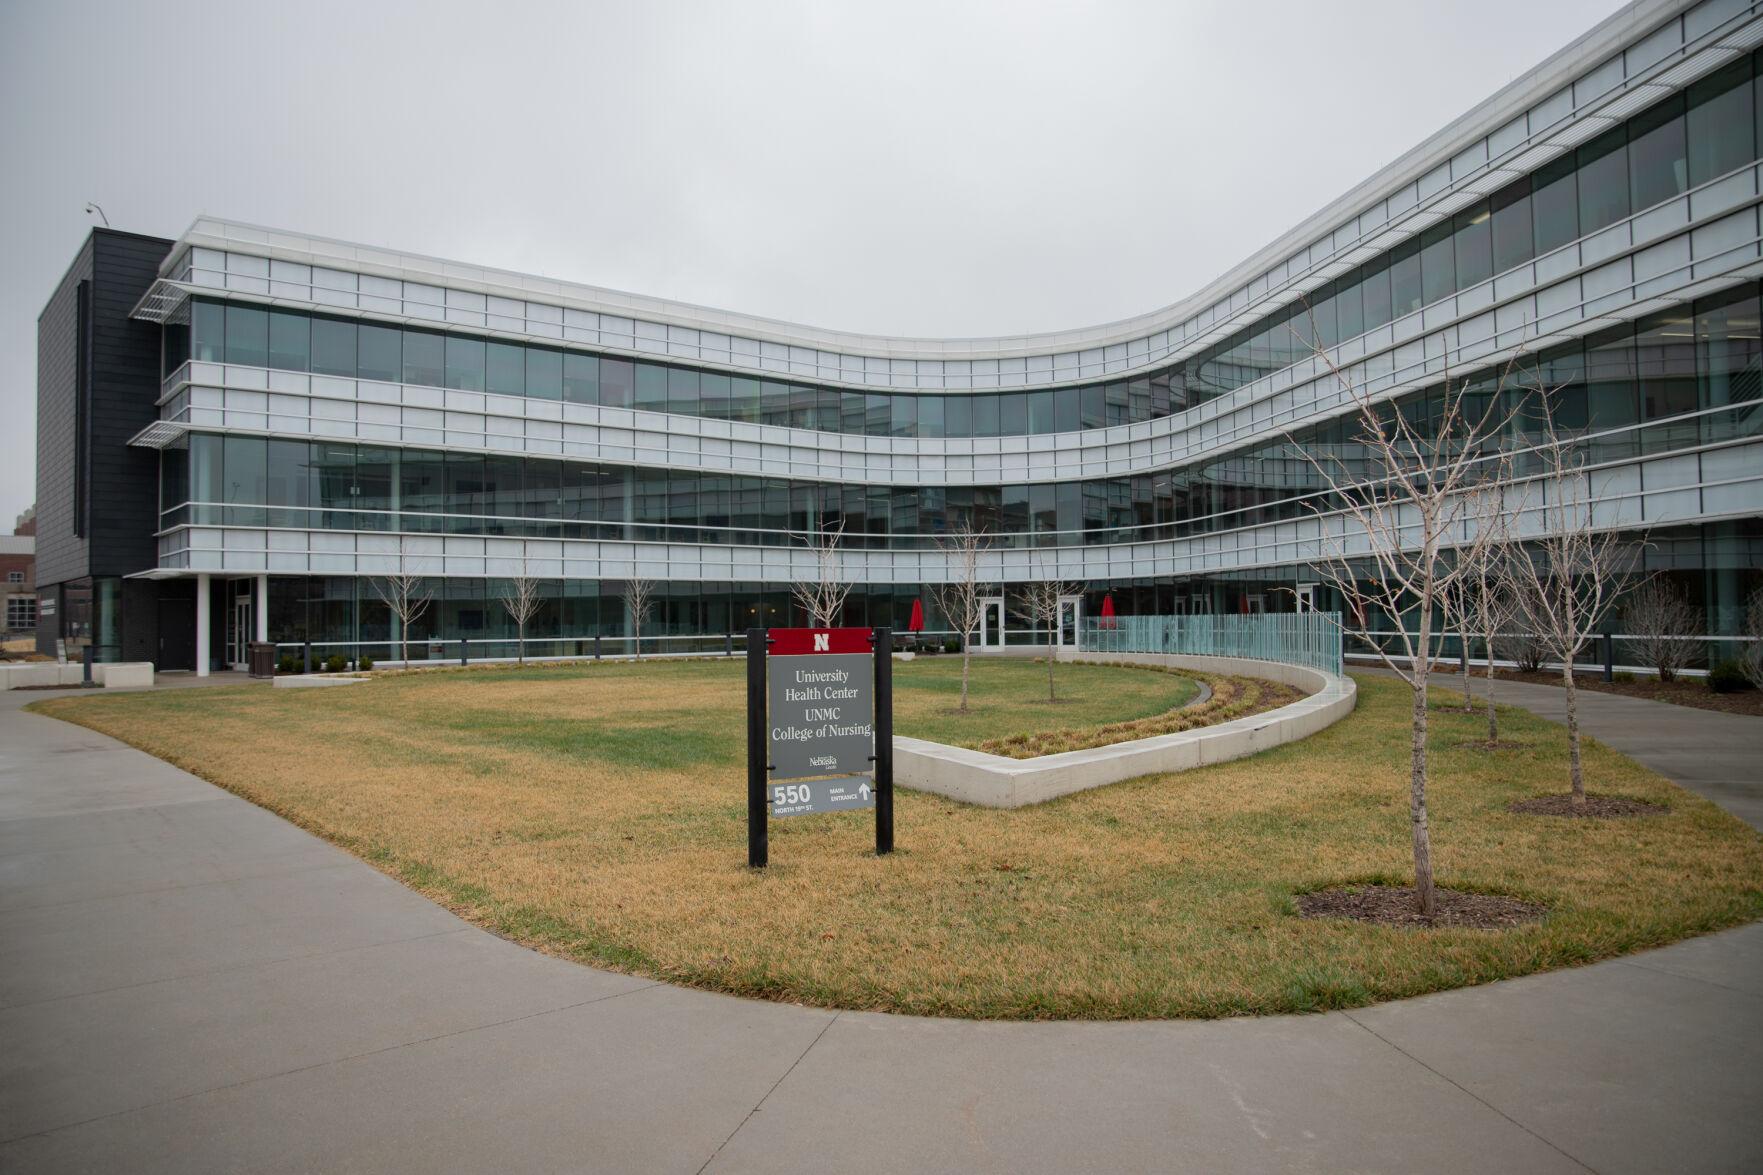   The University Medical Center is pictured on Tuesday, March 23, 2021, in Lincoln, Nebraska. [Photo by Evan Dondlinger | Daily Nebraskan] 